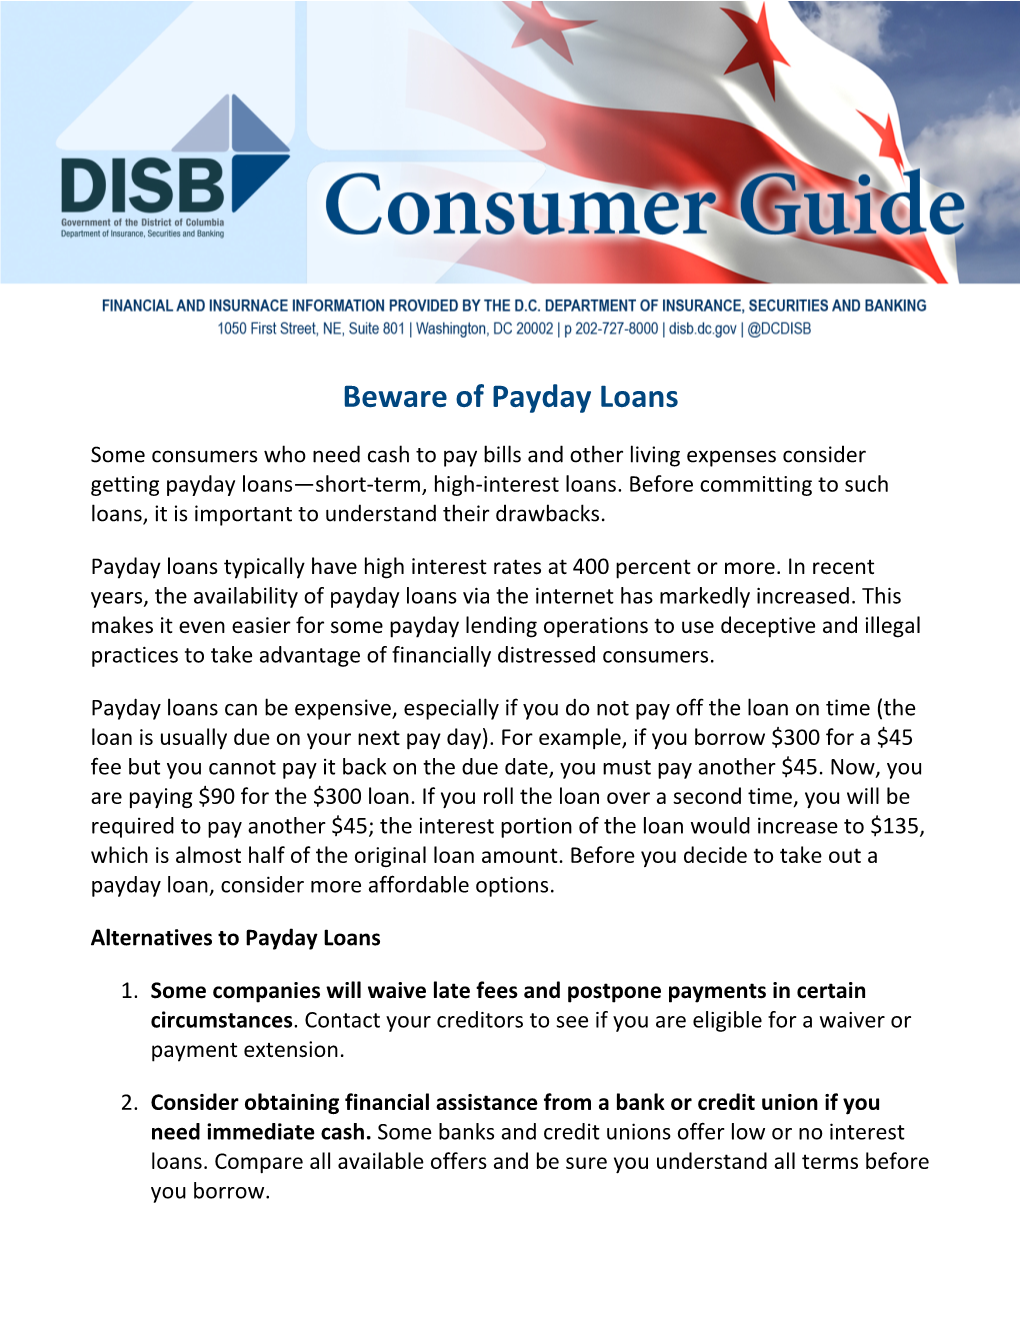 Beware of Payday Loans